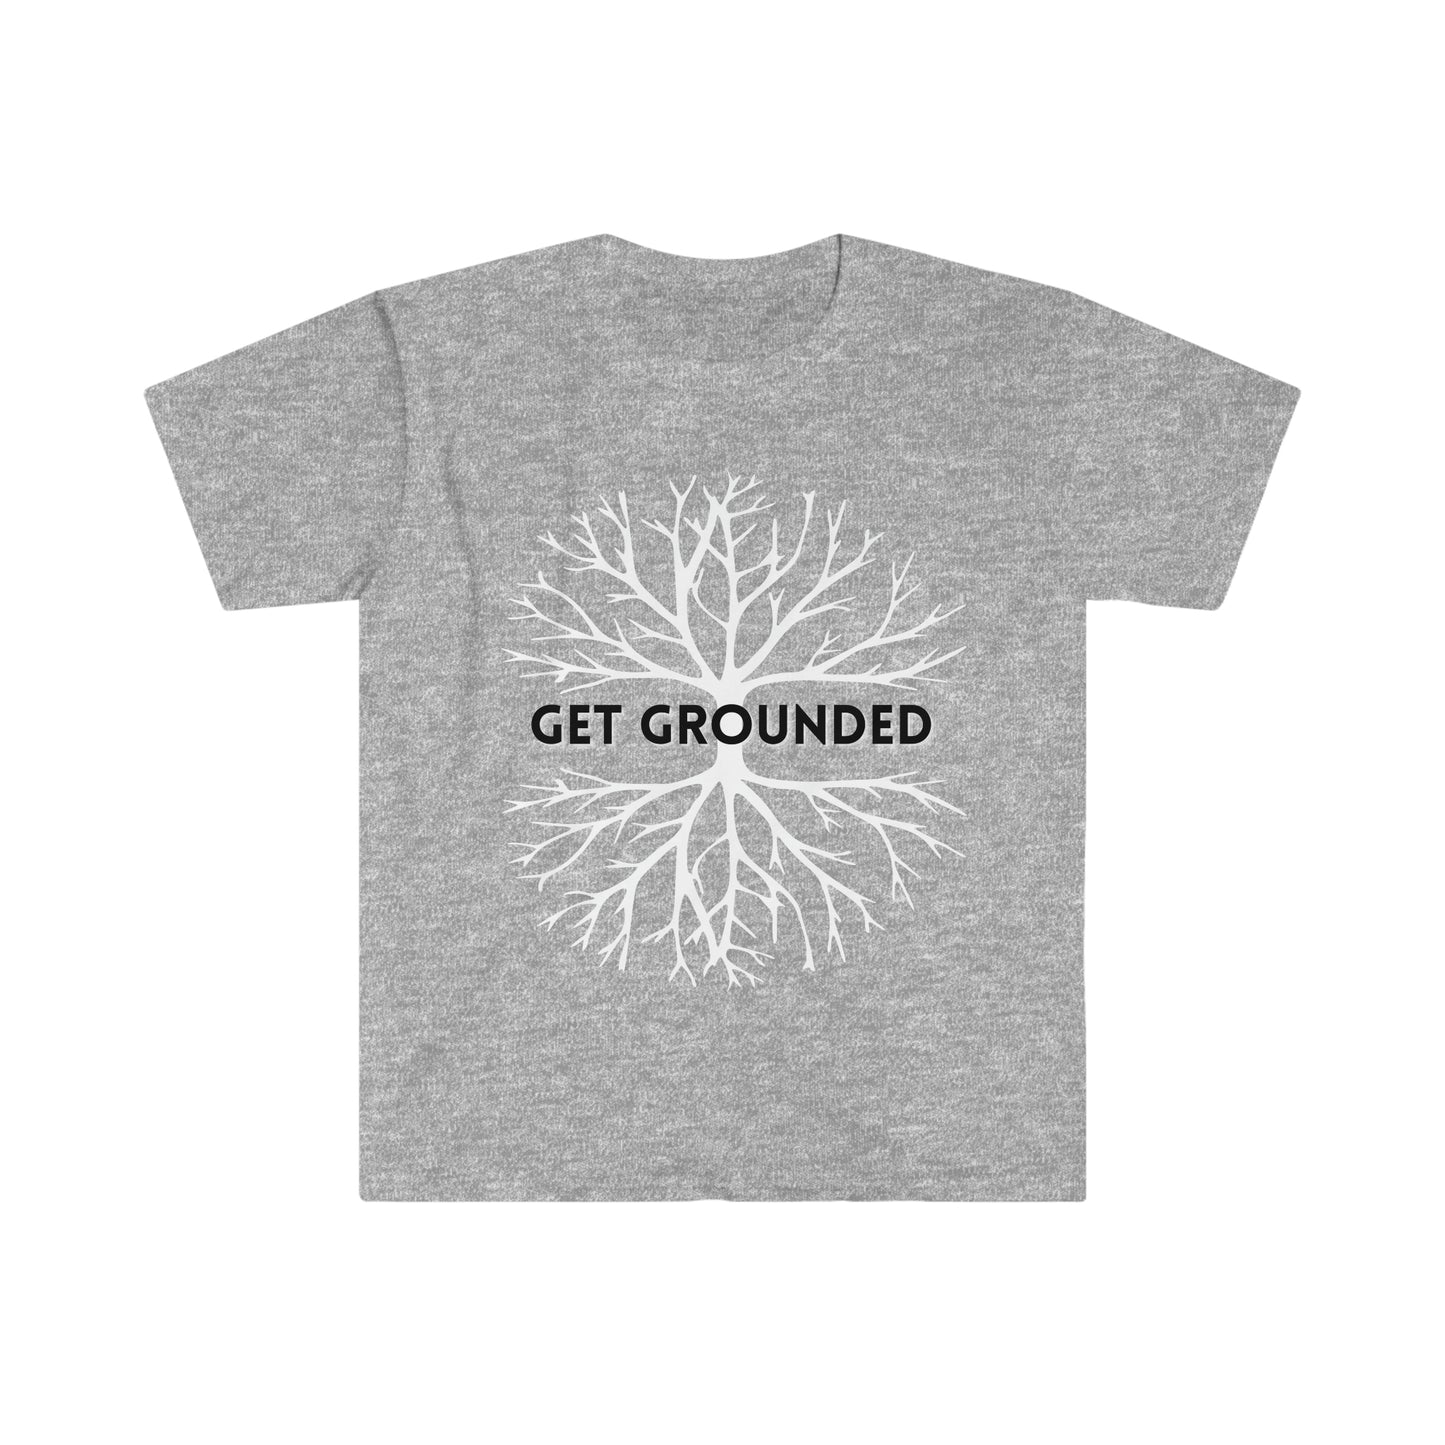 Get Grounded!  Inspirational tee. 100% soft cotton